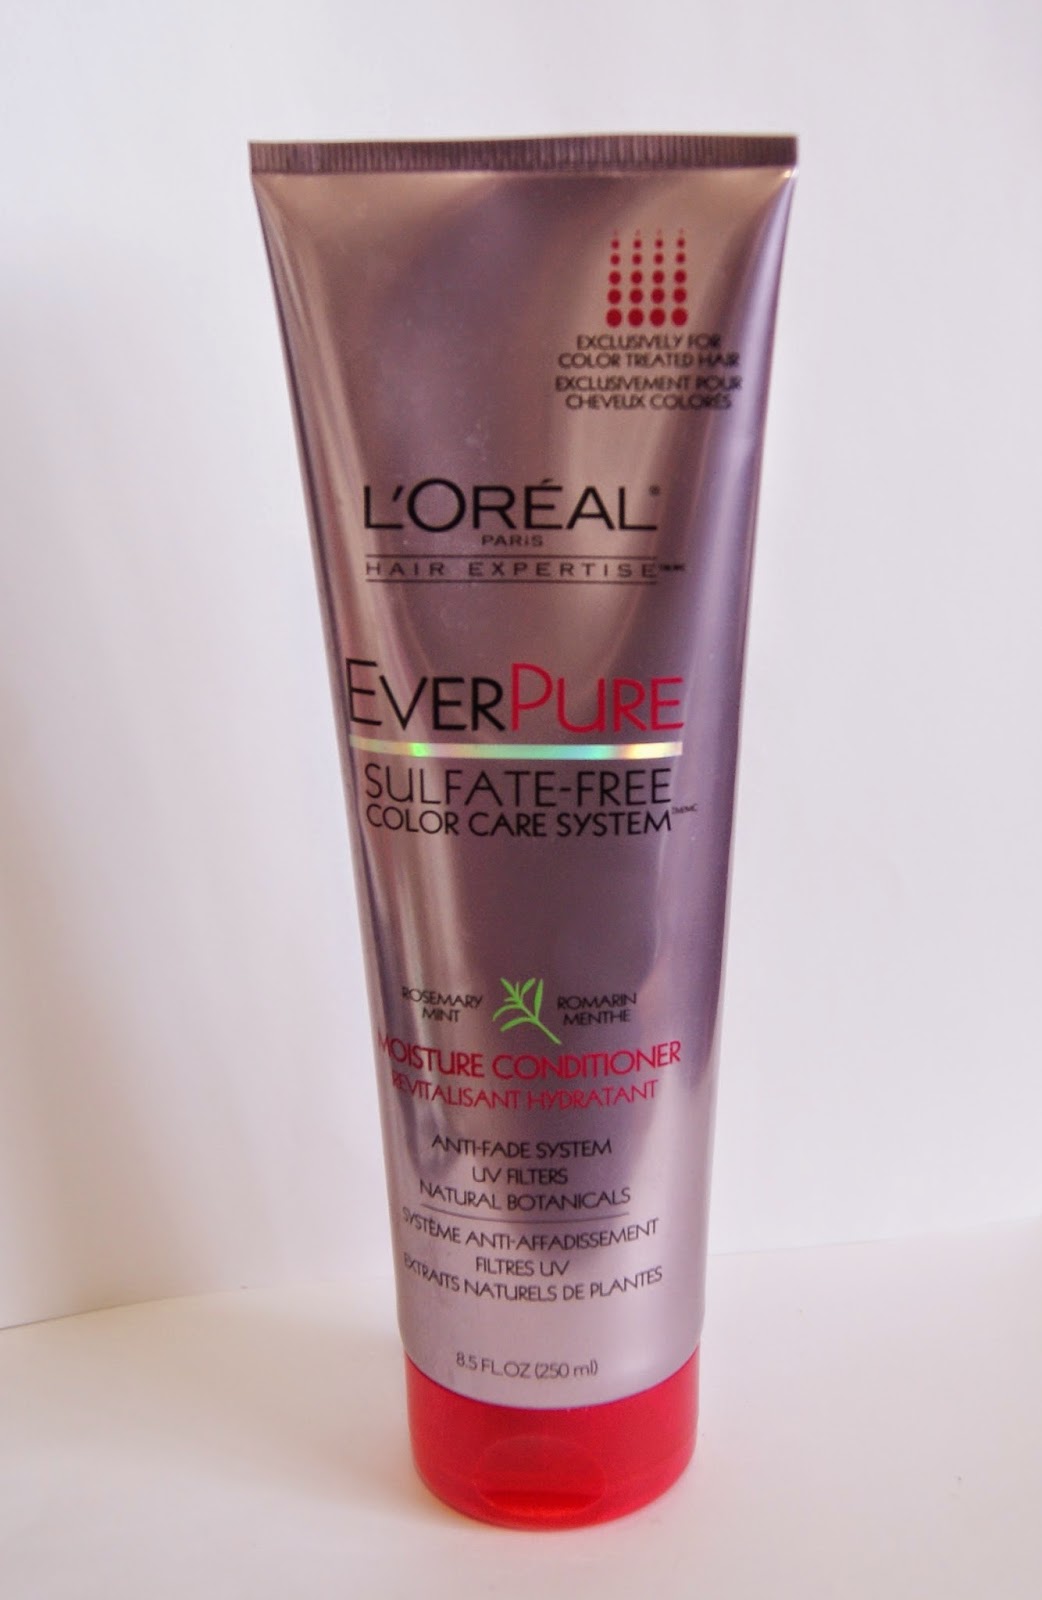 L'Oreal EverPure Sulfate-Free Color Care System: Moisture Shampoo, Conditioner, and Hair Masque Review Beauty Haircare, Melanie.Ps Toronto Blogger The Purple Scarf